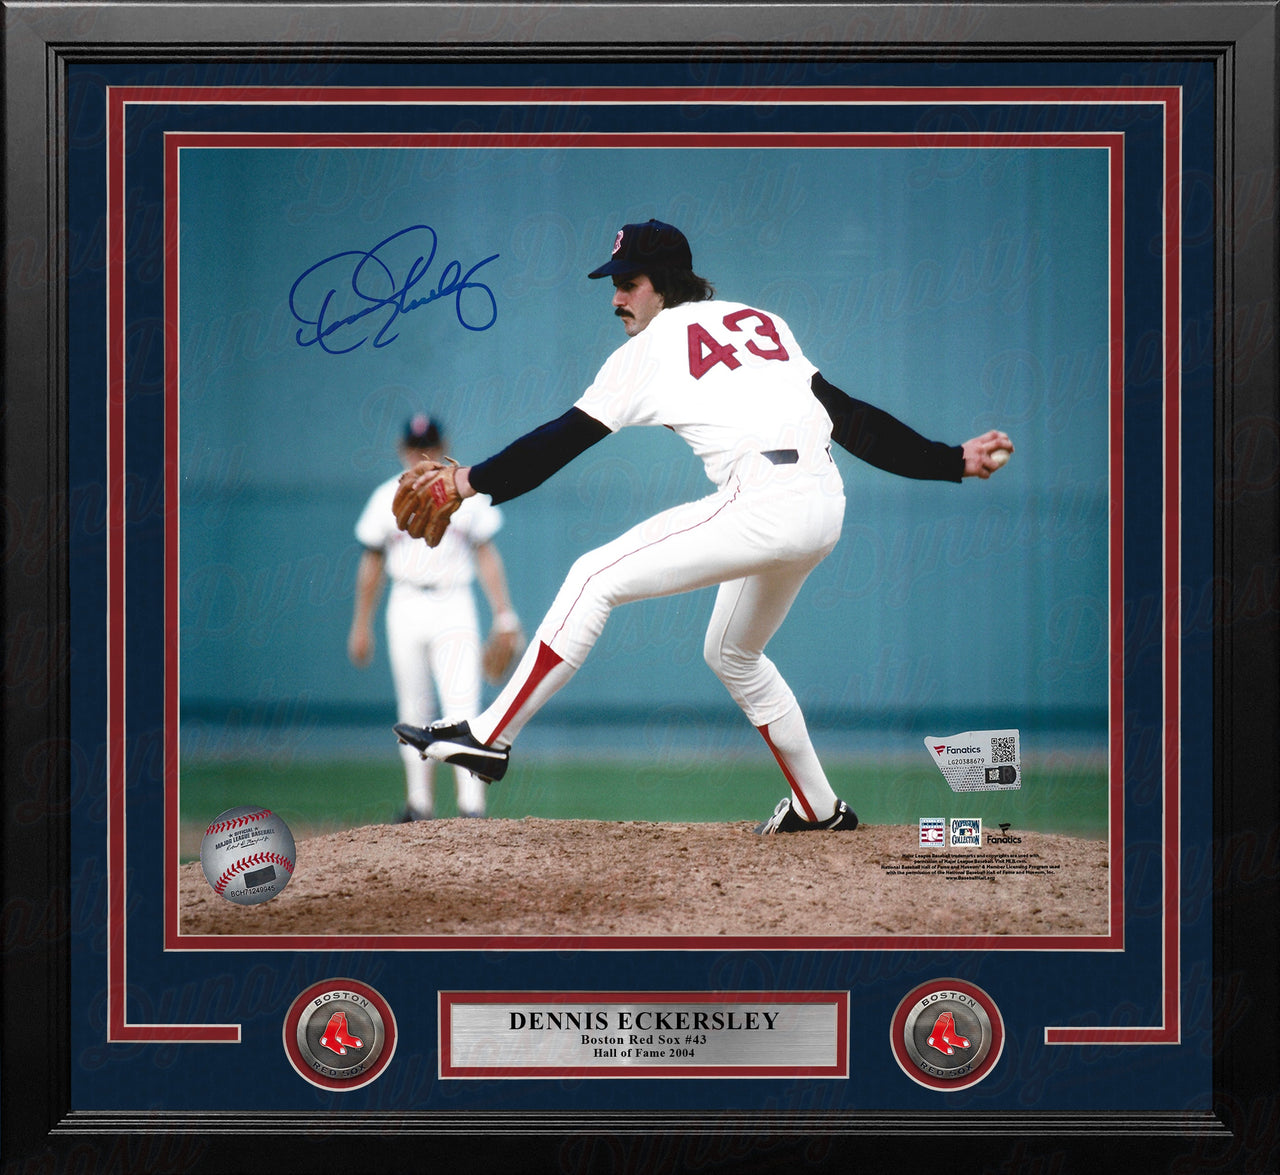 Dennis Eckersley in Action Boston Red Sox Autographed 16" x 20" Framed Baseball Photo - Dynasty Sports & Framing 